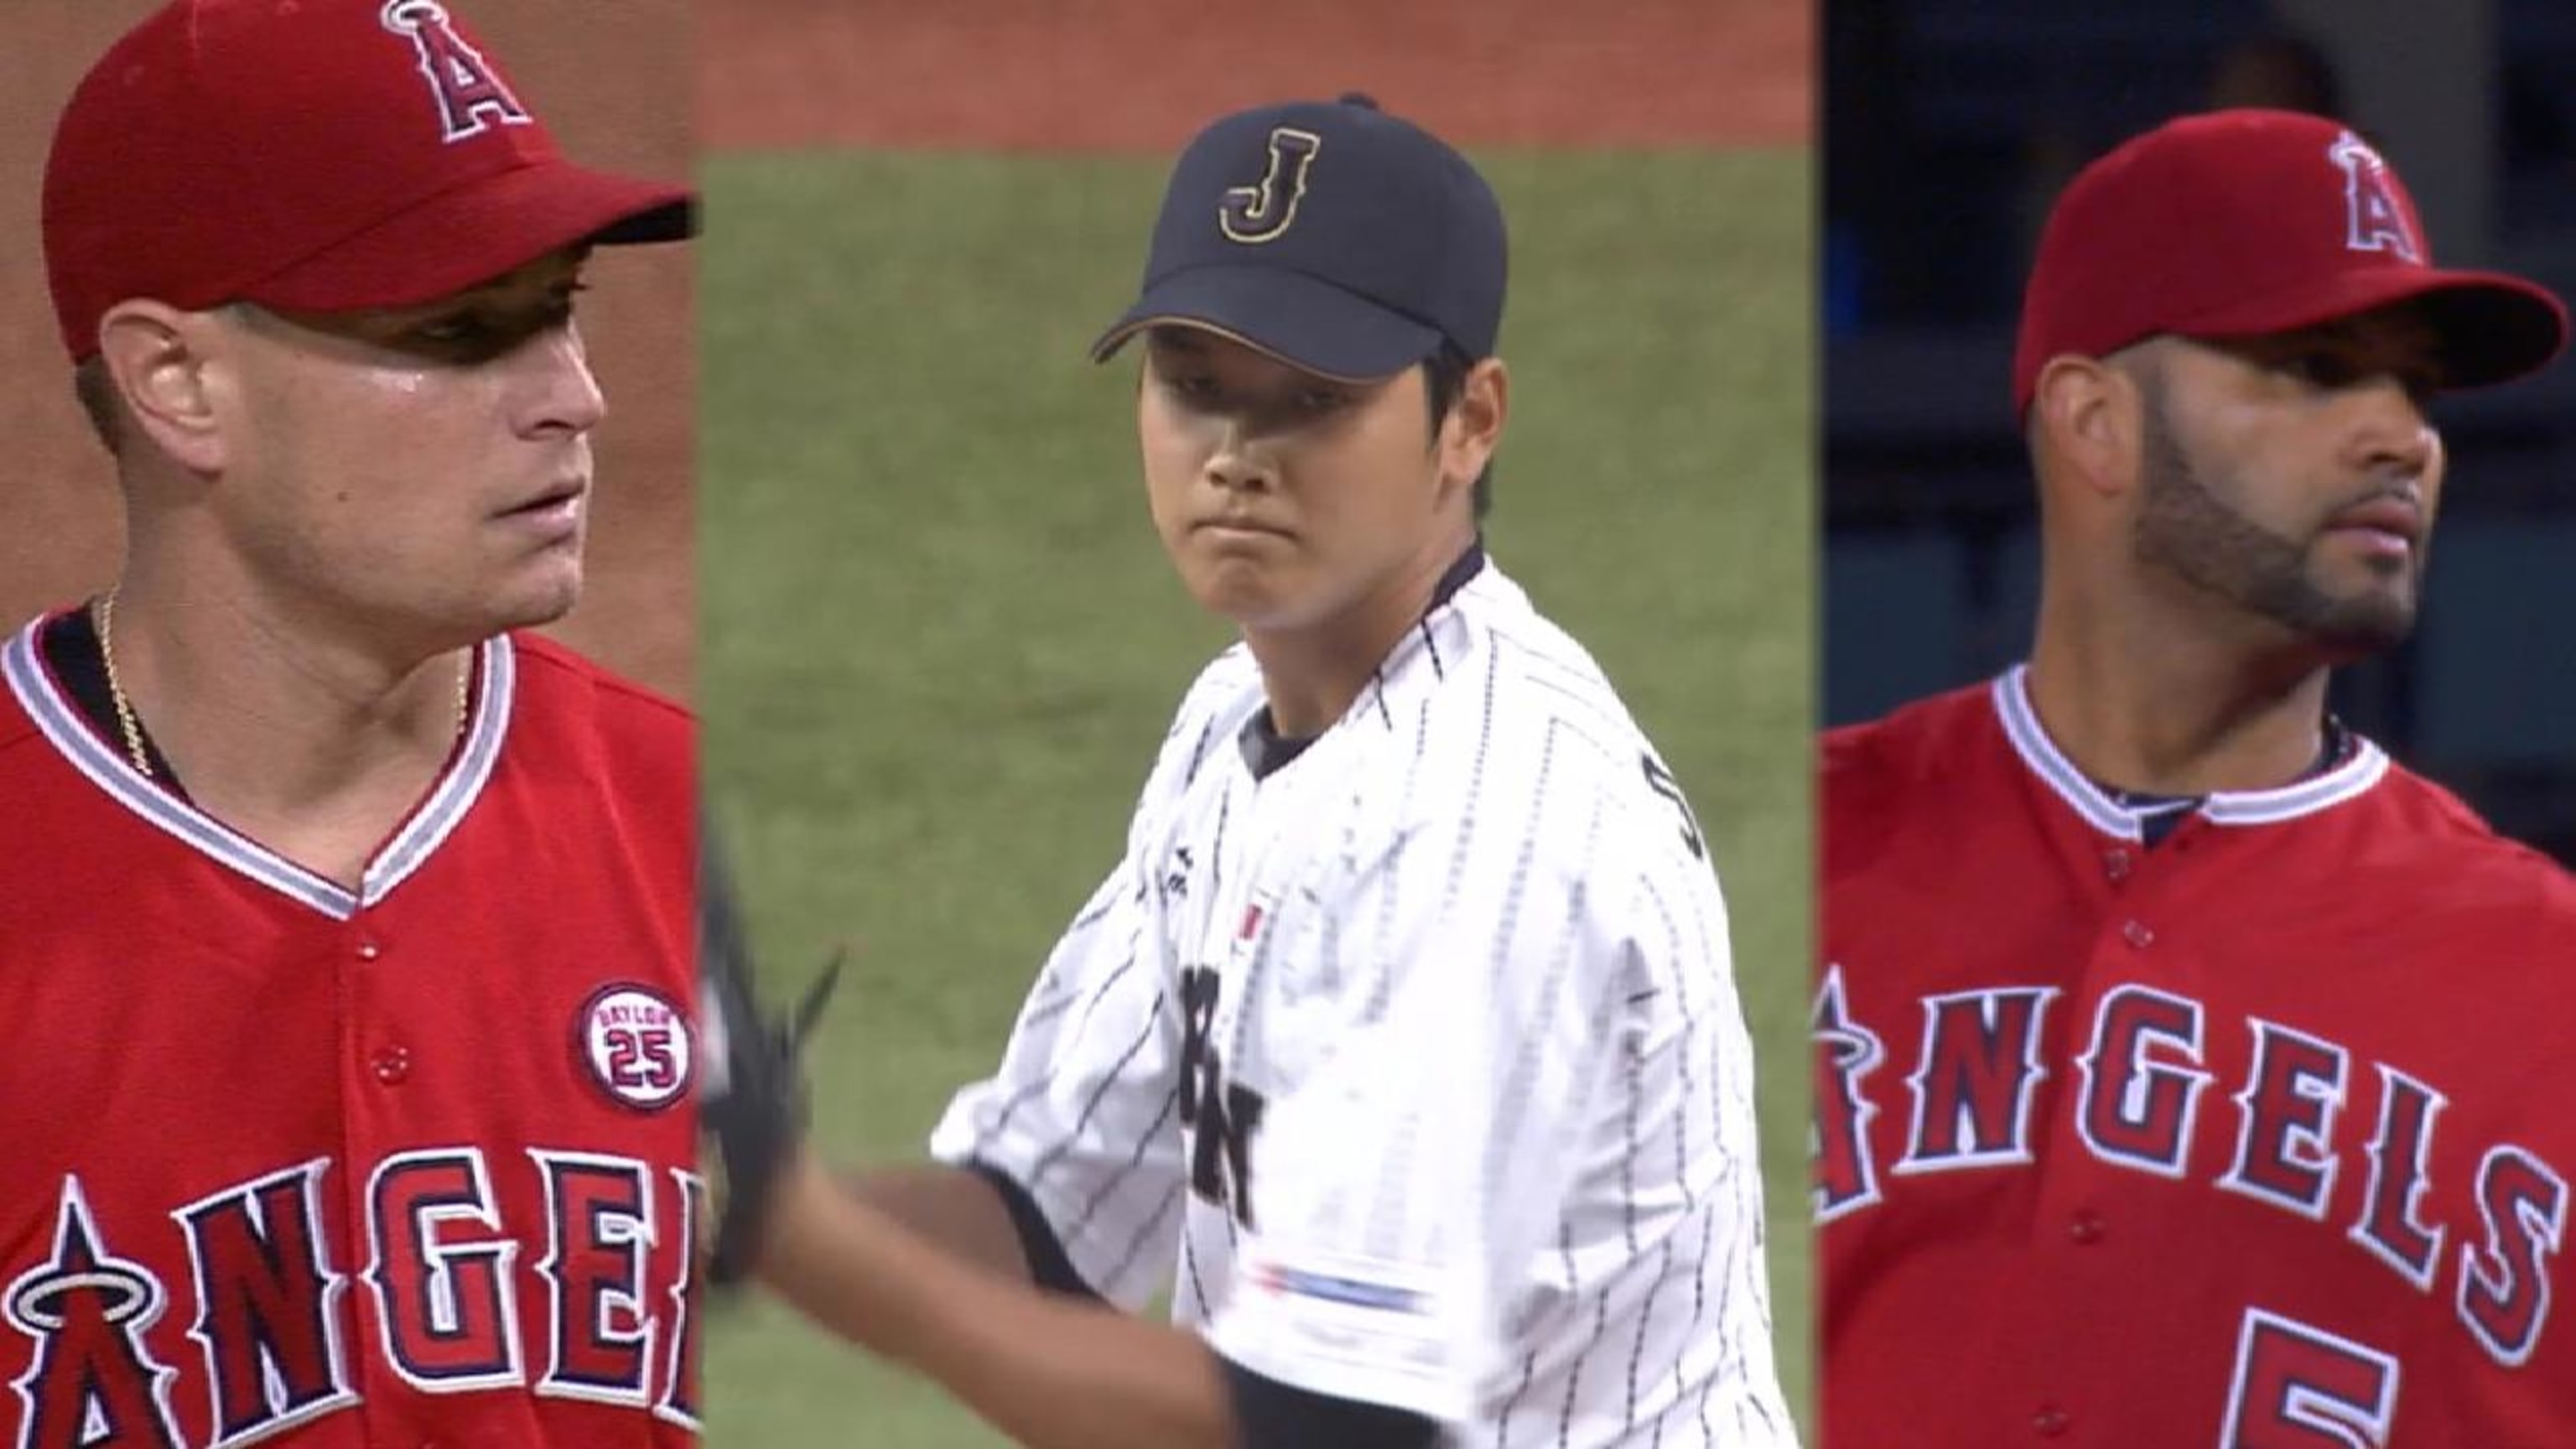 Mariners are one of seven finalists in the Shohei Ohtani sweepstakes